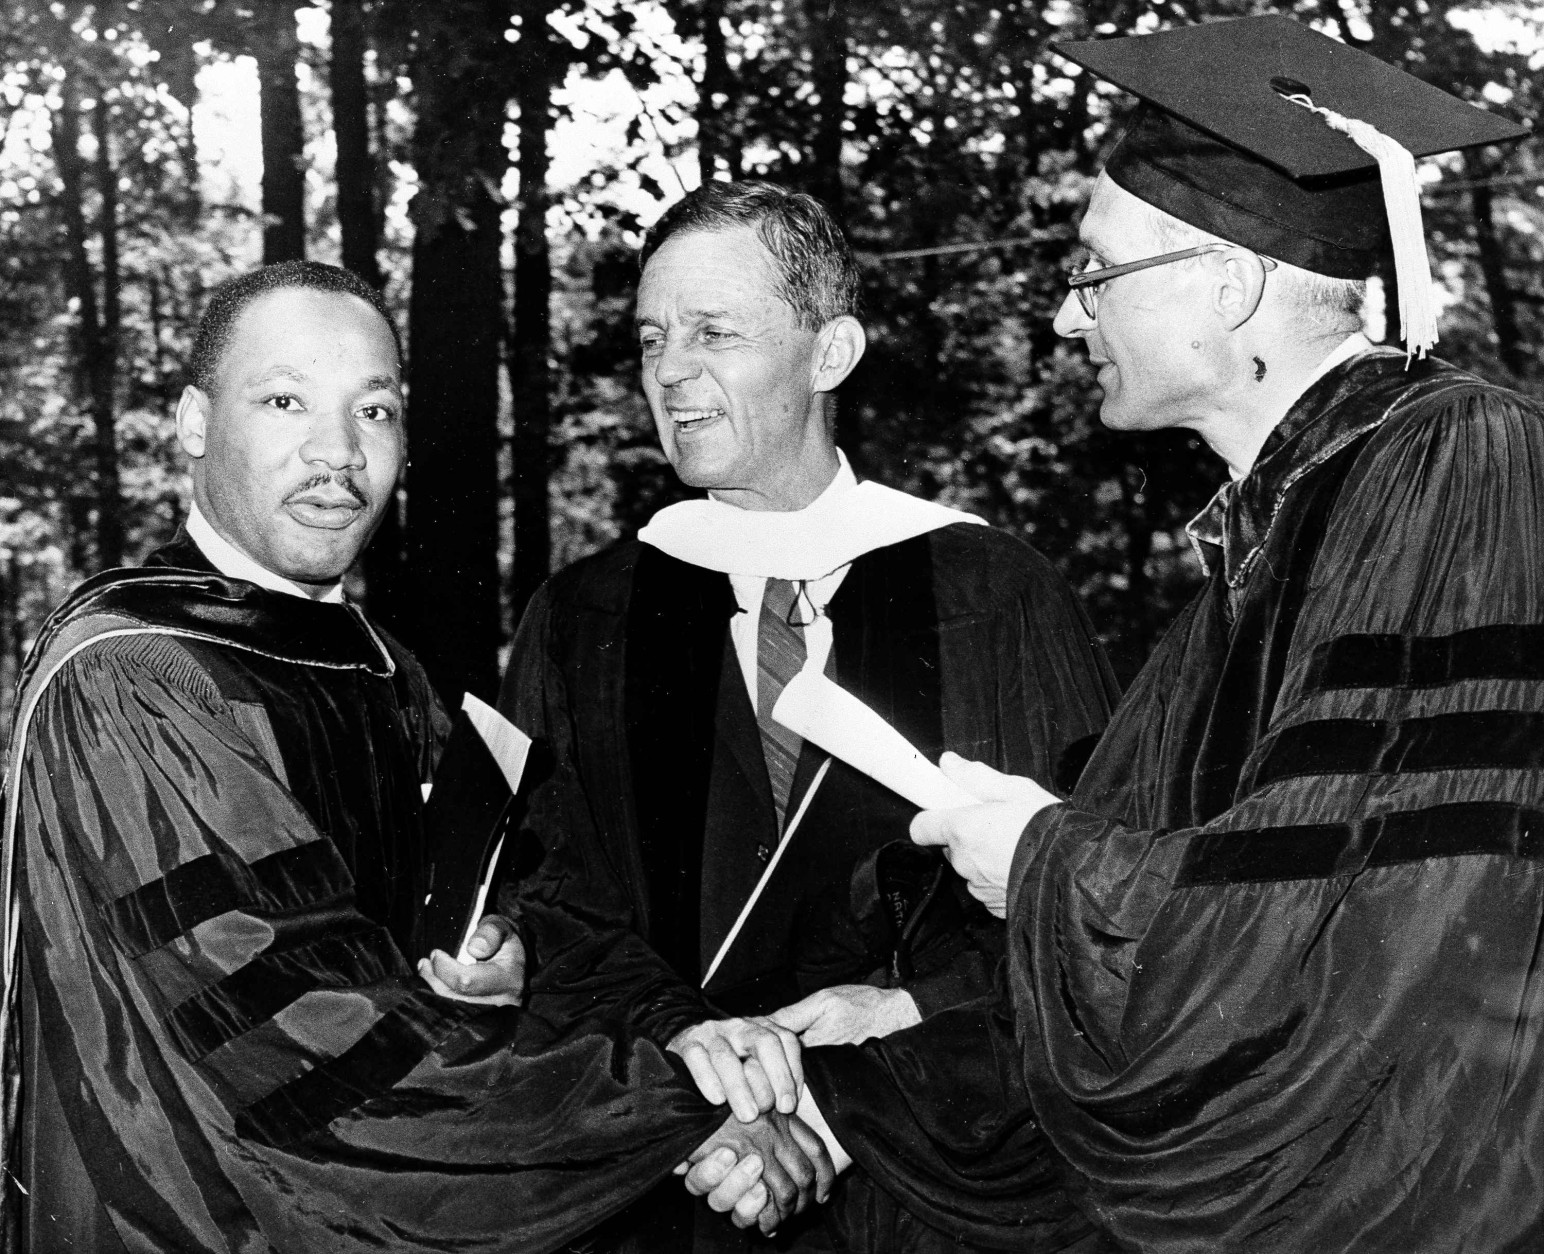 U.S. Sen. Joseph Clark (D-Pa.), center, laughs along with Dr. Martin Luther King, left, leader against segregation, at Lincoln University commencement exercises, June 7, 1961, Oxford, Pa. At right is acting President Donald Yelton. (AP Photo/Sam Myers)